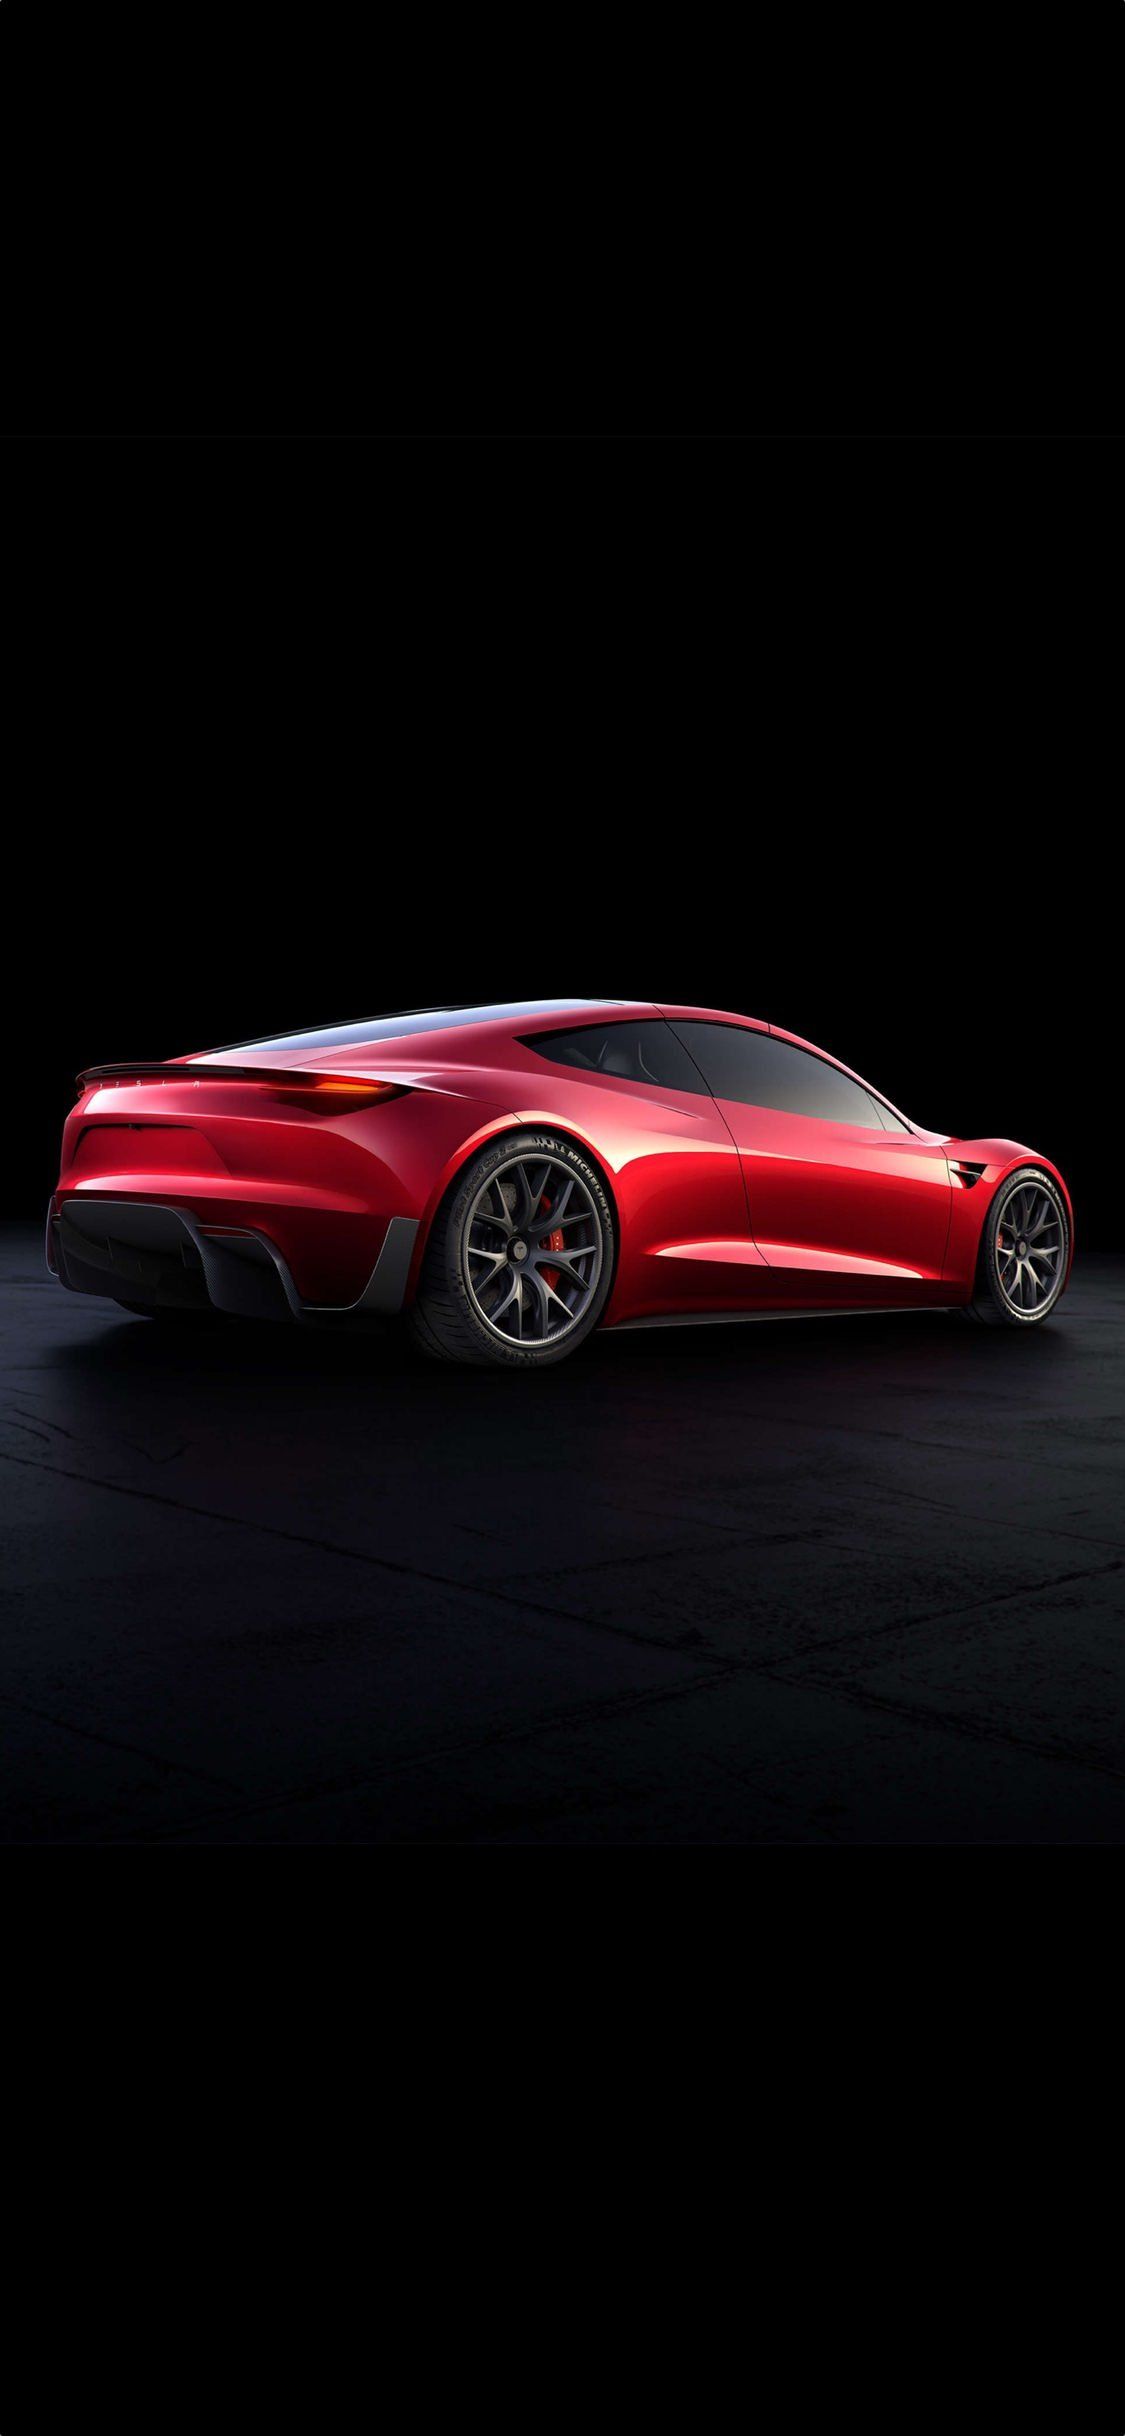 Free download Tesla Roadster 2020 Wallpaper For iPhone X iPad And Mac iOS Hacker [1125x2436] for your Desktop, Mobile & Tablet. Explore 2020 iPhone Wallpaper iPhone Wallpaper, iPhone Player 2020 Wallpaper, iPhone 4k 2020 Wallpaper